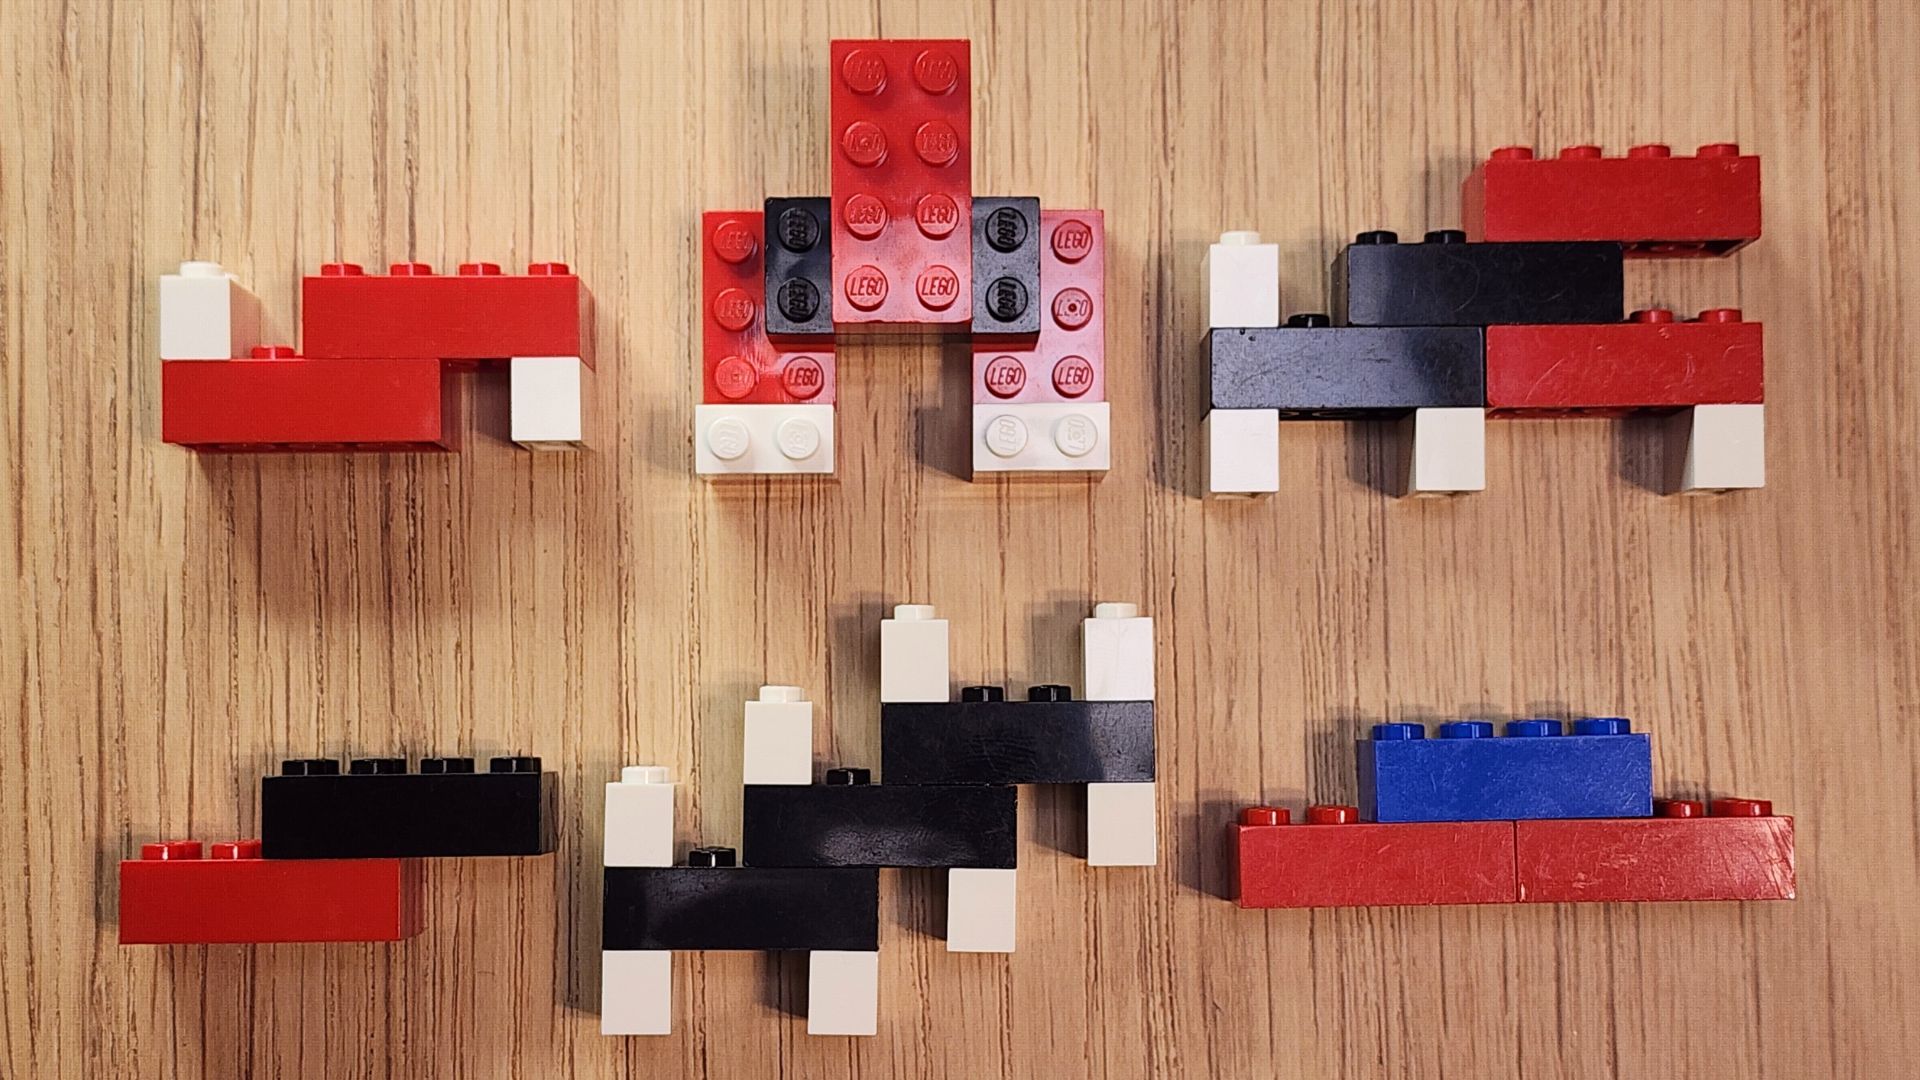 There are six brick molecules pictured. Top left: two red 2x4 bricks with two white 1x2 bricks; top middle: 3 red 2x4 bricks connected by a black 2x4 brick with two 1x2 white bricks; top right: two black 2x4 bricks connected in an offset manner with two red 2x4 bricks attached on the right end and four 1x2 white bricks attached. Bottom left: one red 2x4 brick and one black 2x4 brick connected in an offset manner; bottom middle: three black 2x4 bricks connected in an offset manner to look like stairs with 6 1x2 white bricks at each end on top and bottom; bottom right: two red 2x4 bricks connected by a blue 2x4 brick on top.